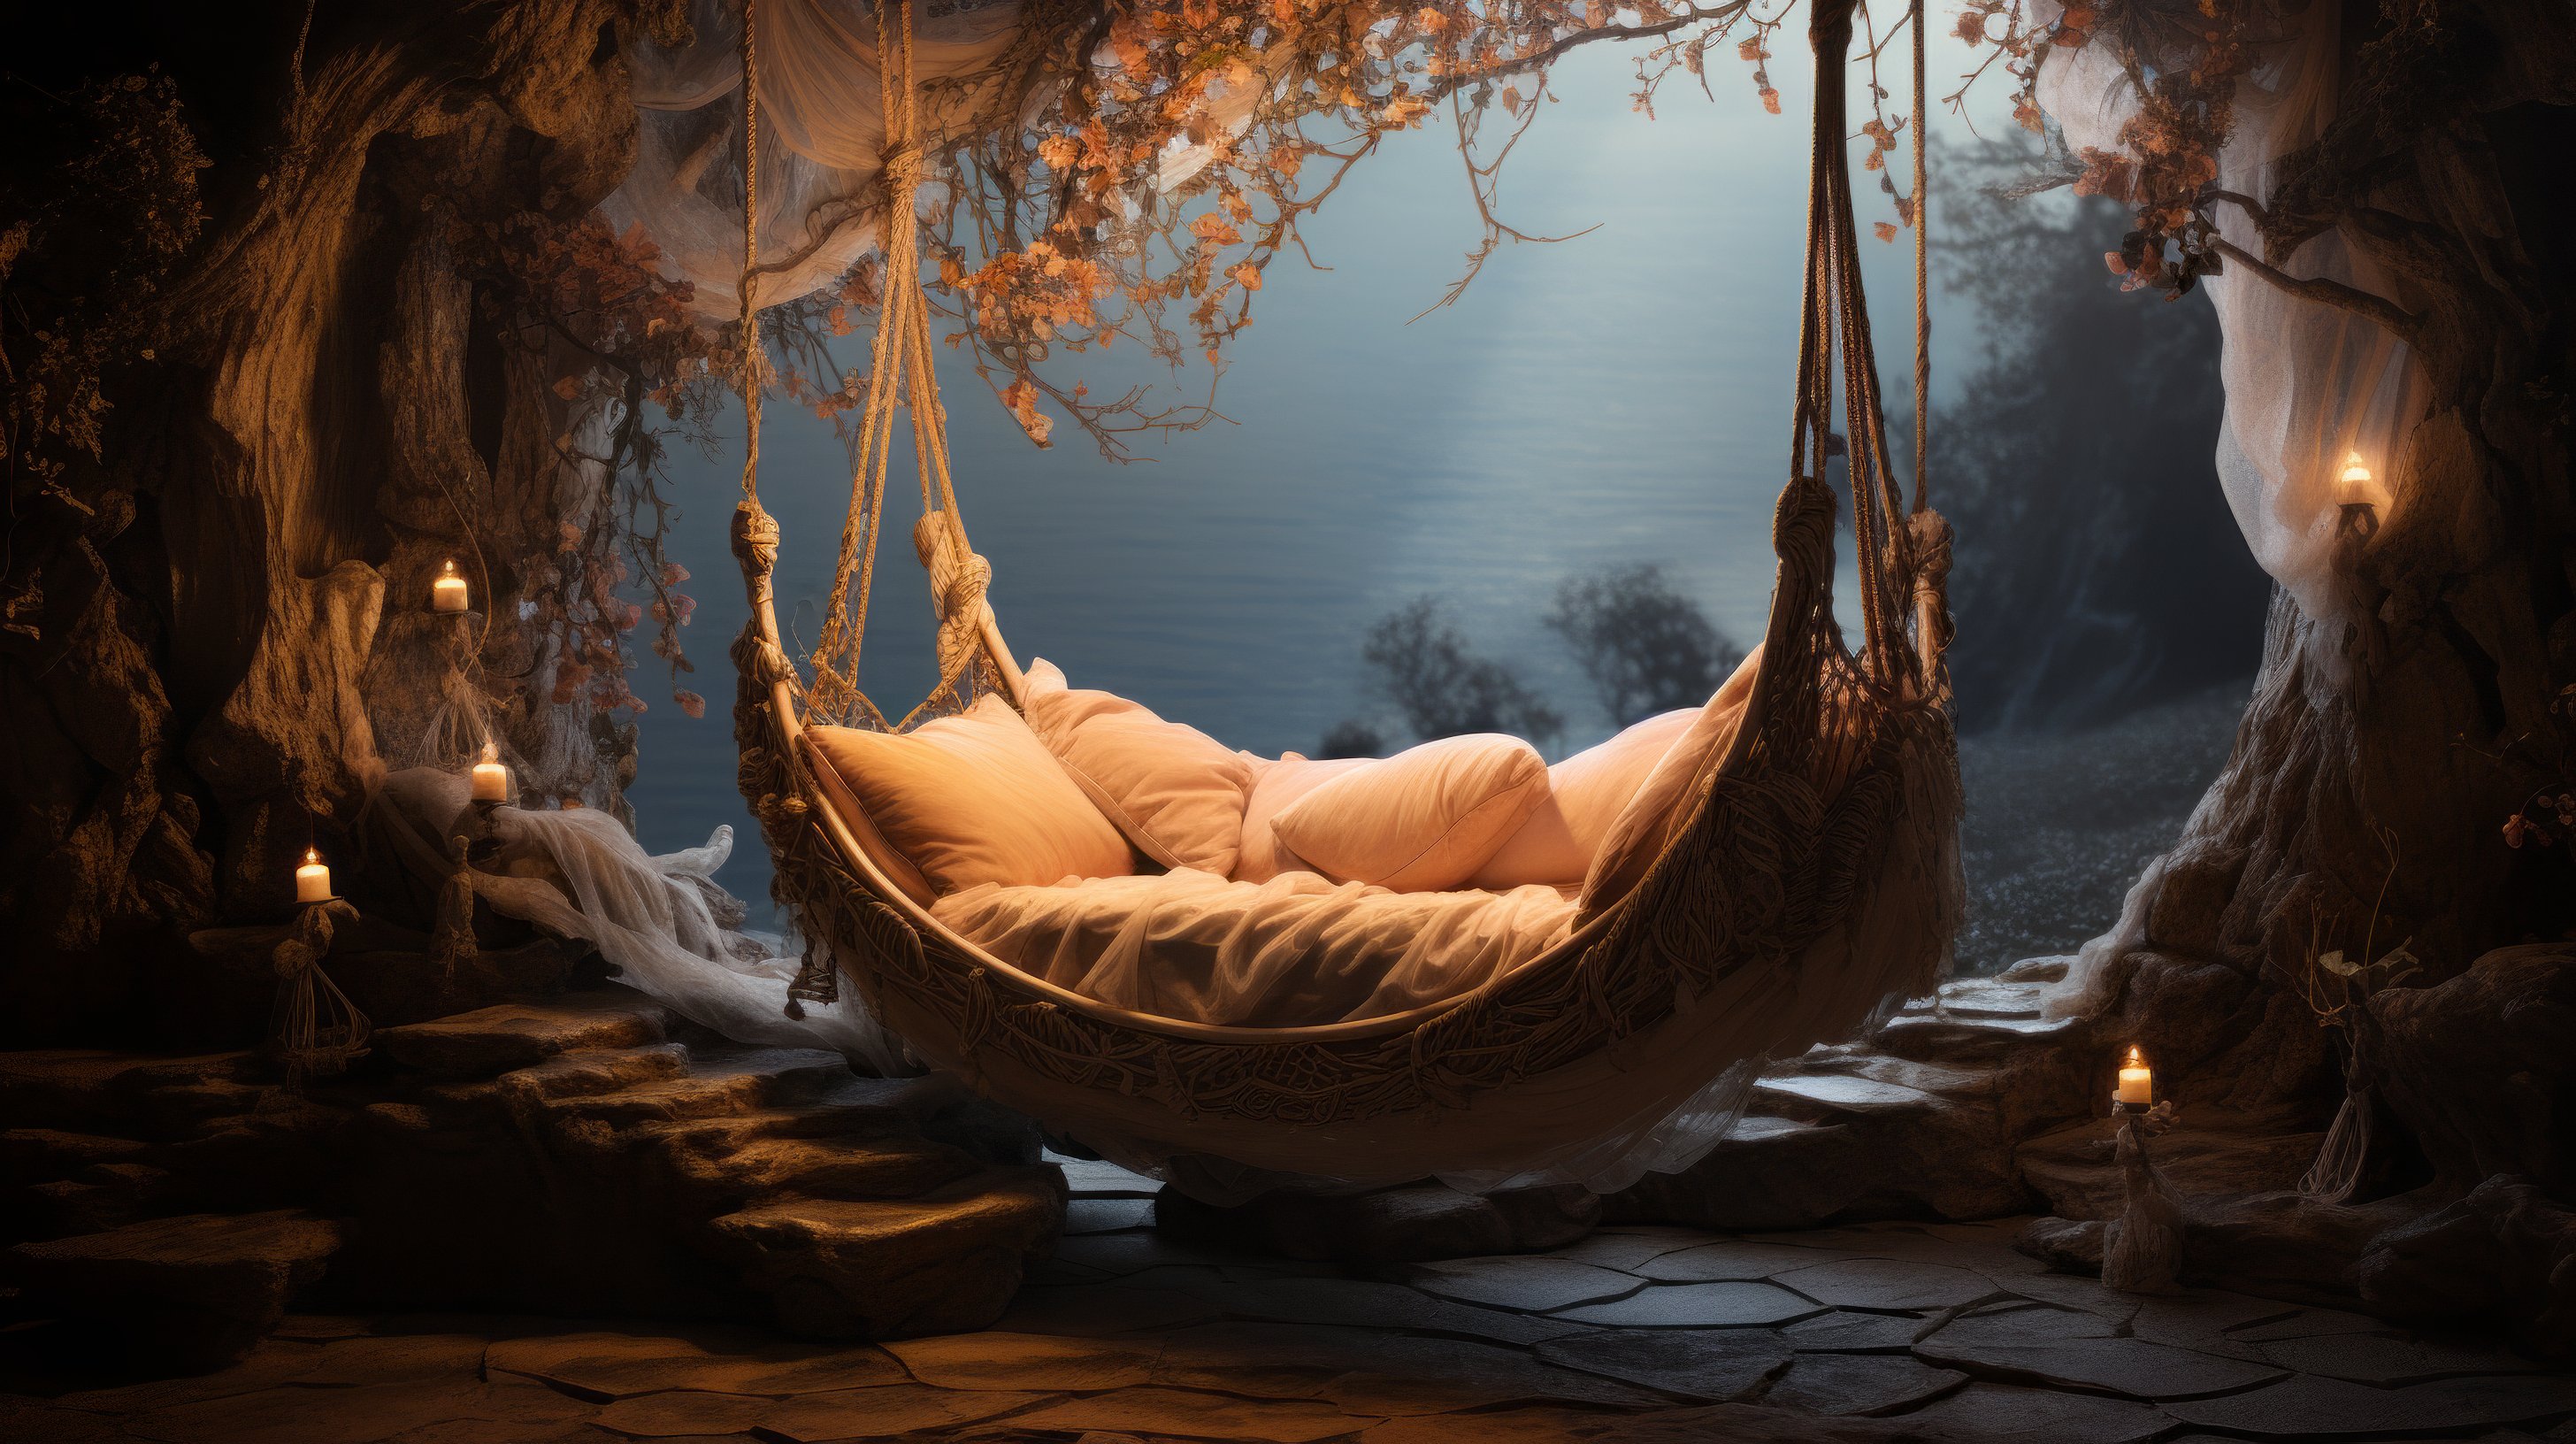 Enchanting AI-generated HD wallpaper featuring a cozy hammock in an atmospheric cave with soft lighting and serene surroundings, perfect for a desktop background.